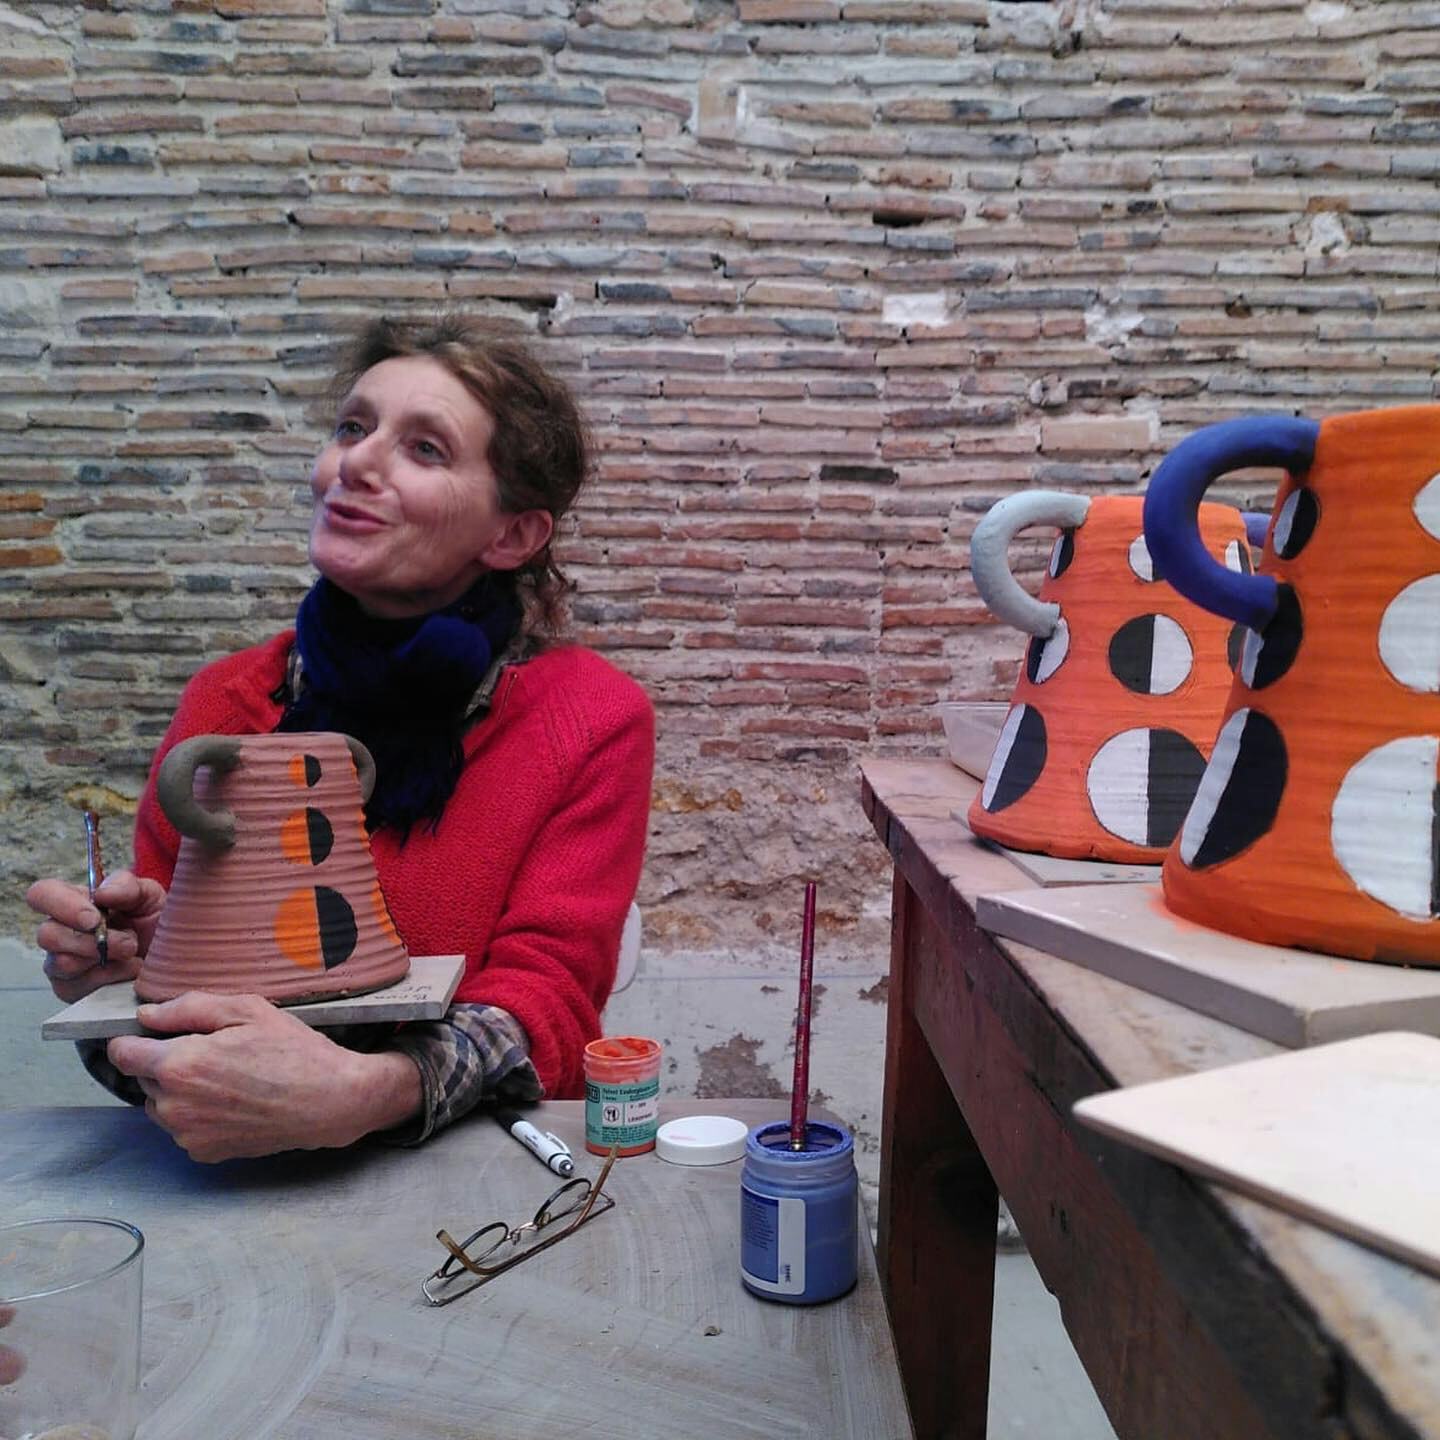 A woman paints a pot with ceramic glaze. Two more glazed pots sit to the side